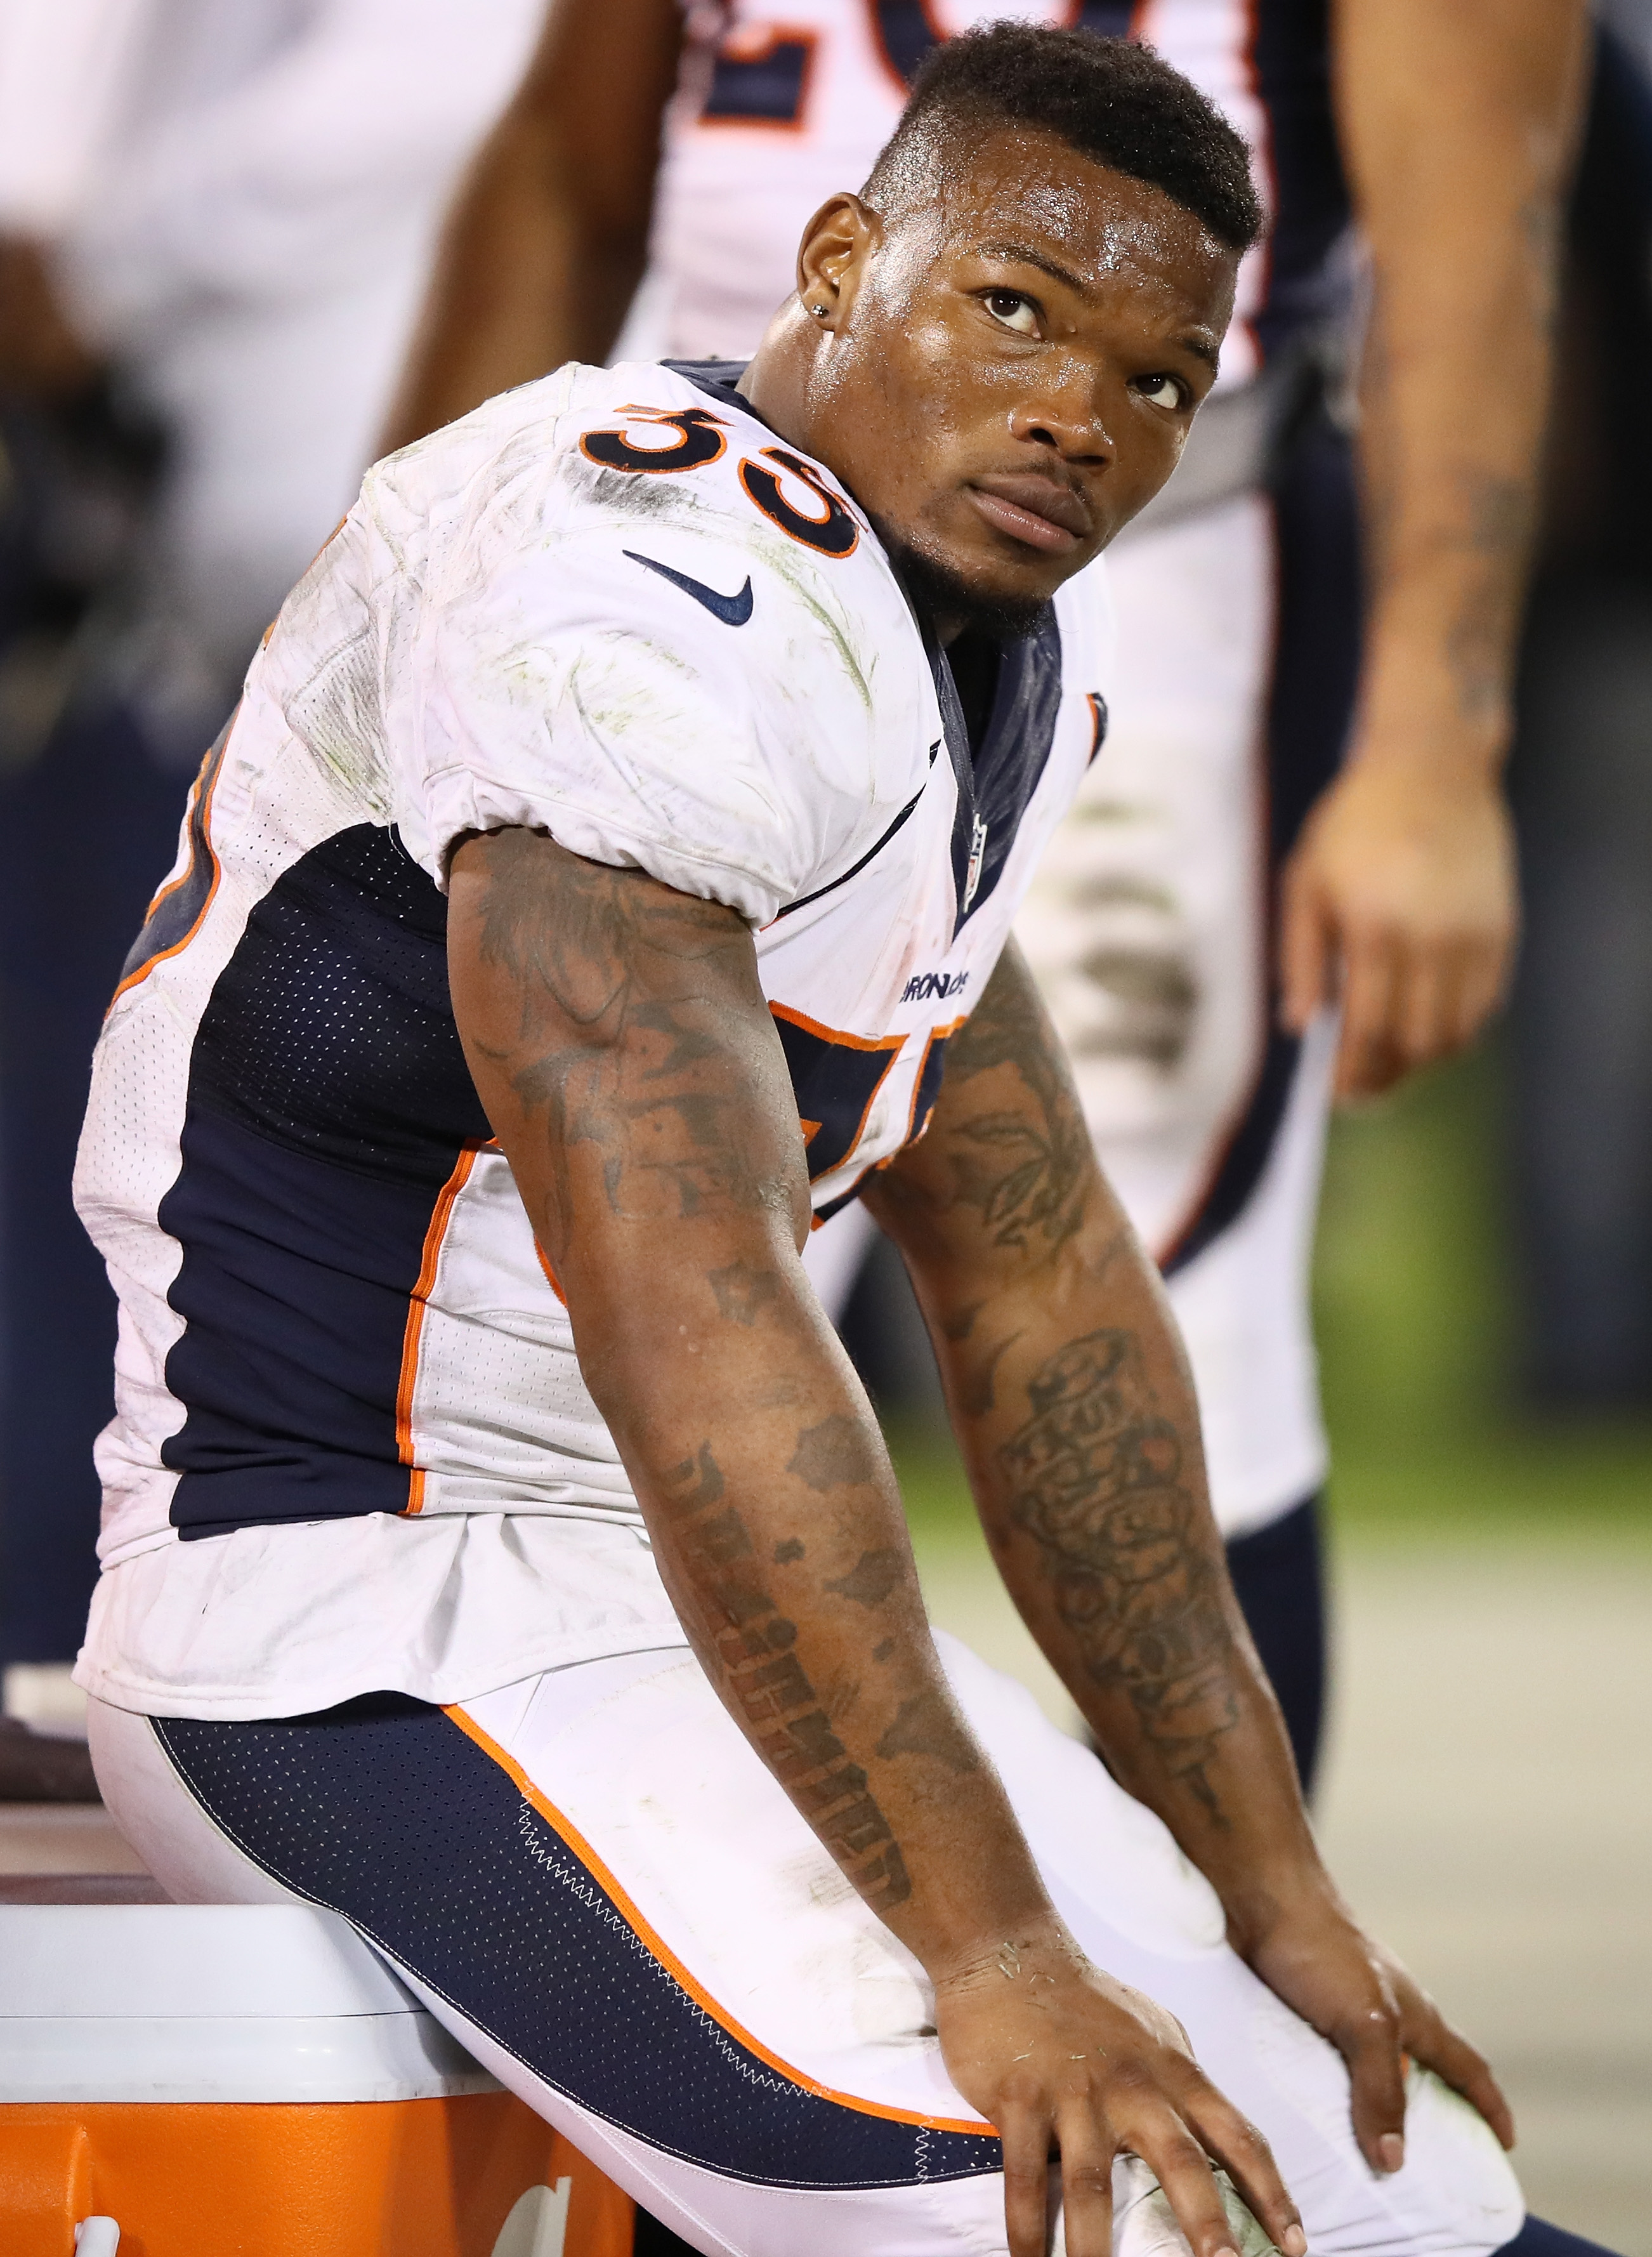 Kapri Bibbs #35 of the Denver Broncos reacts on the bench after losing to the Oakland Raiders at Oakland-Alameda County Coliseum on November 6, 2016 in Oakland, California. (Photo by Ezra Shaw/Getty Images)